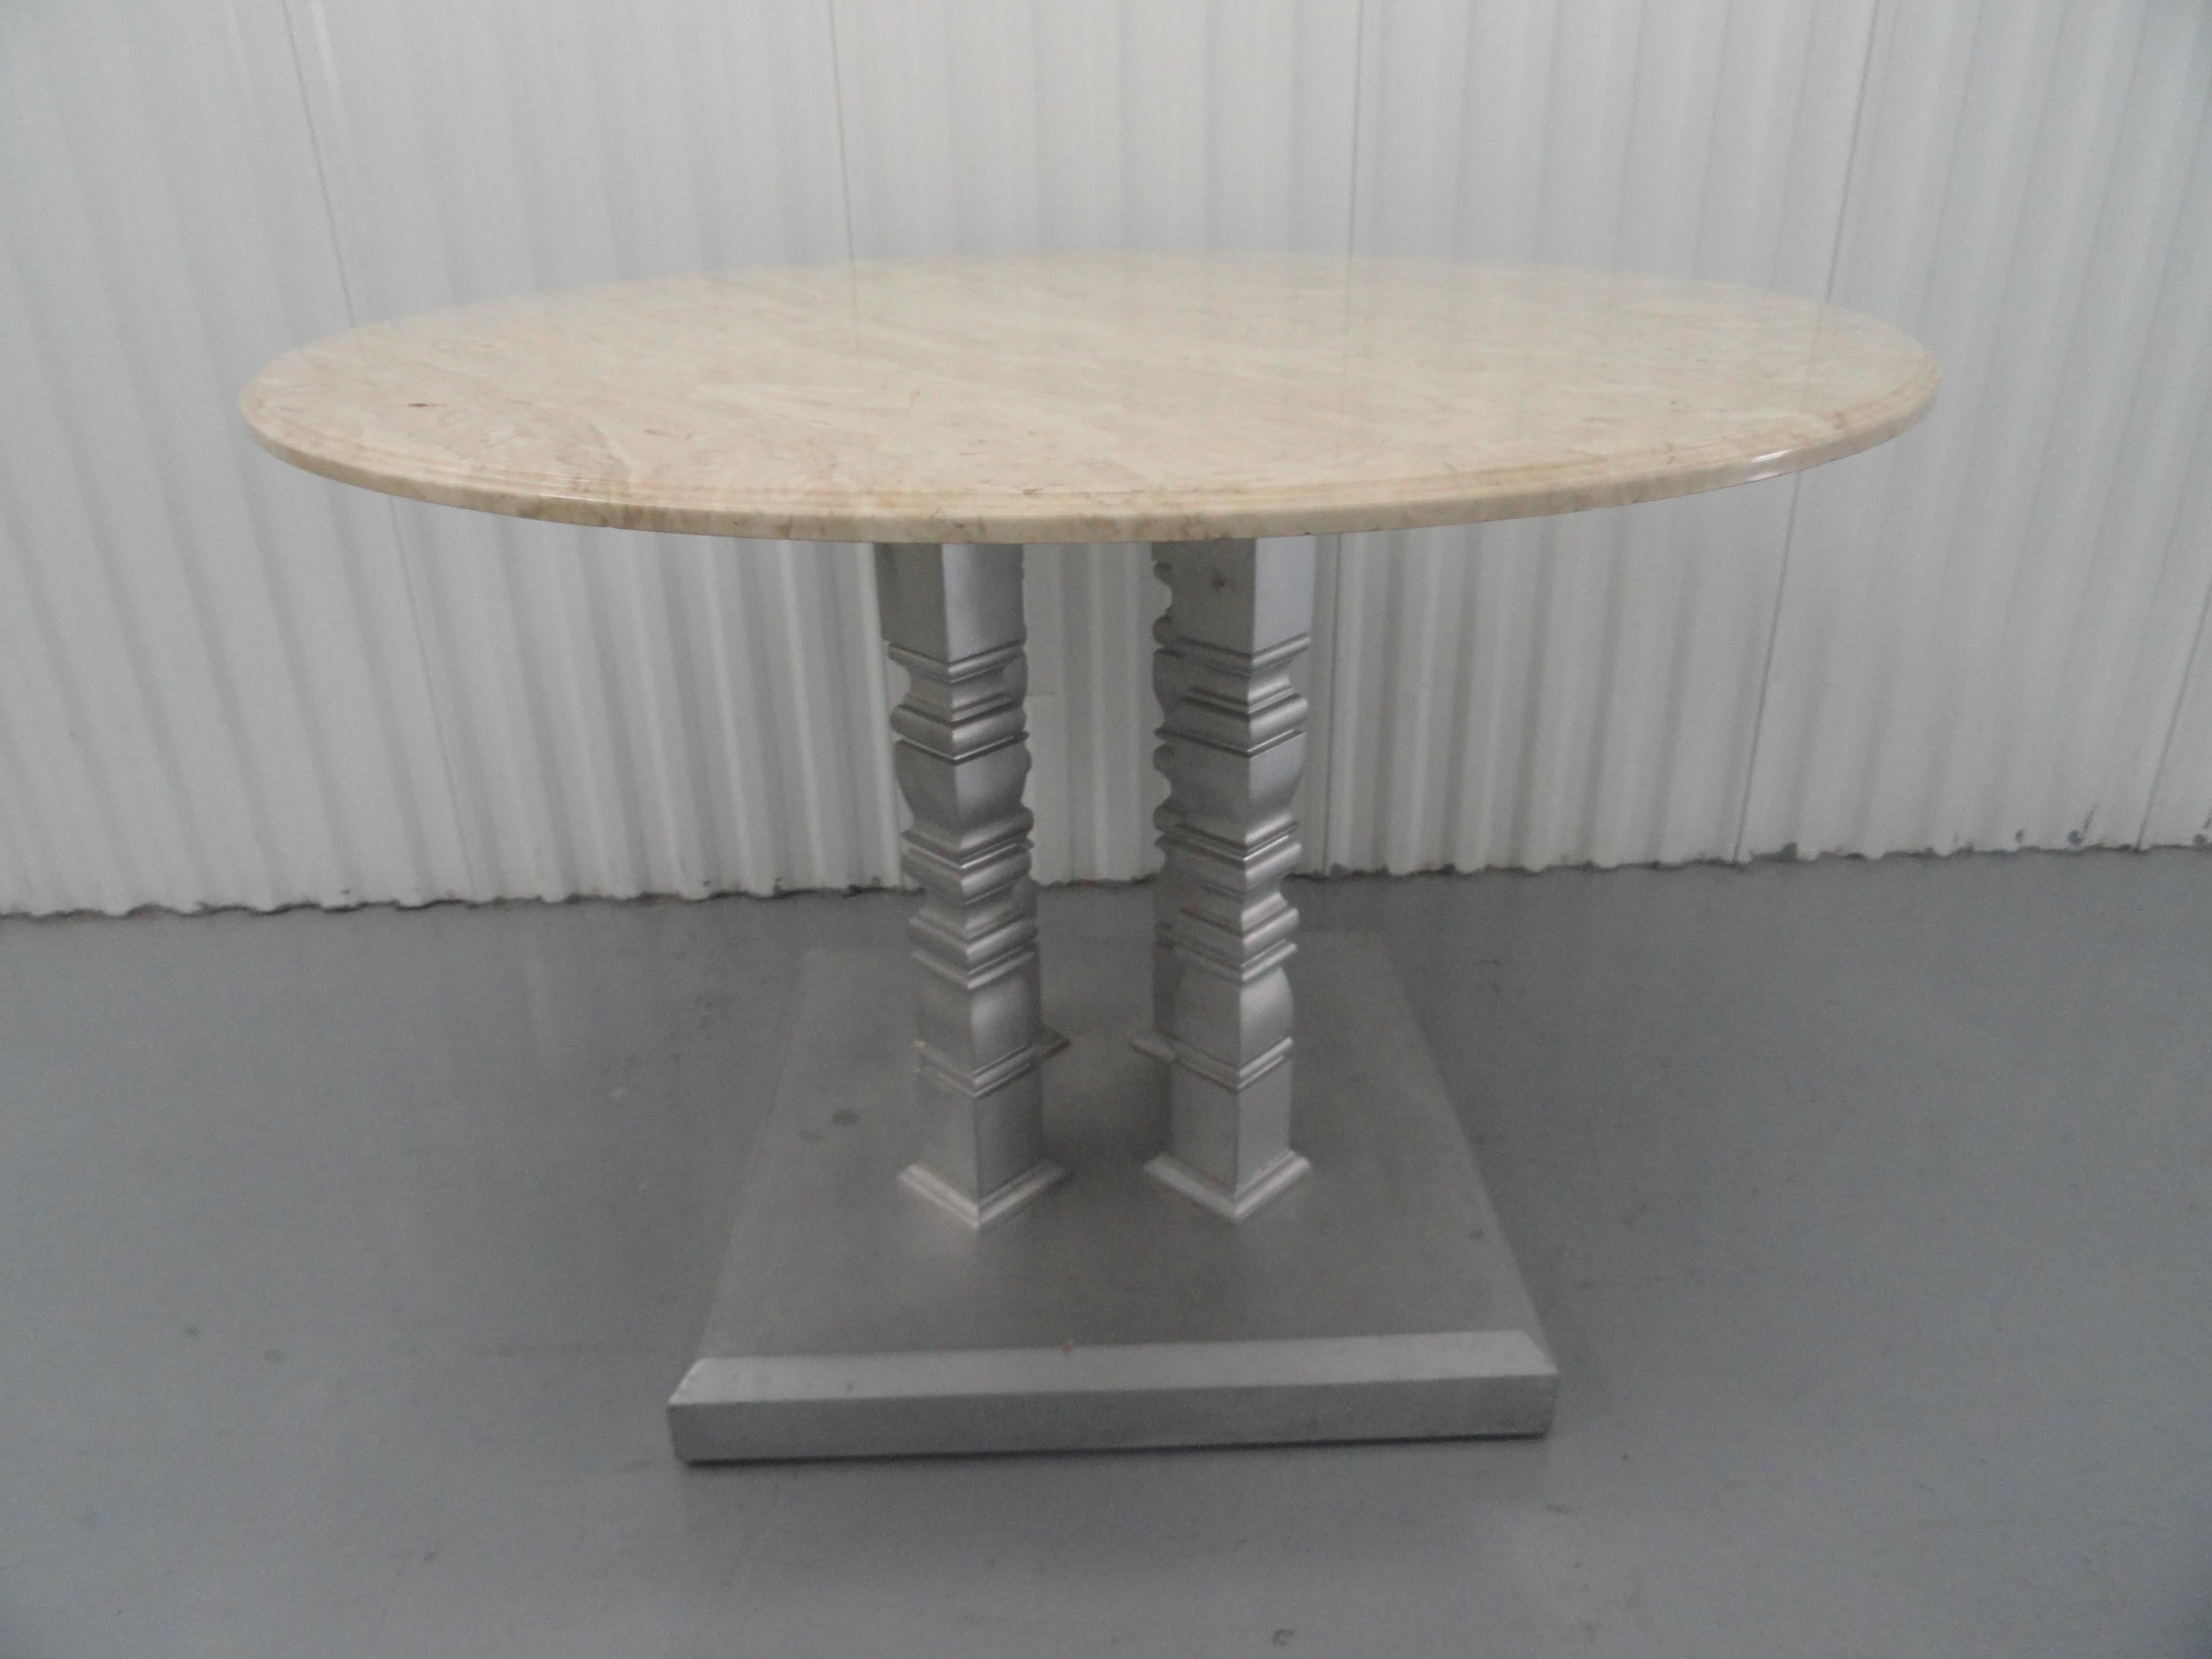 Custom designed table with four-column base, after a design by John Saladino.
Custom base with silver finish. Round marble top.